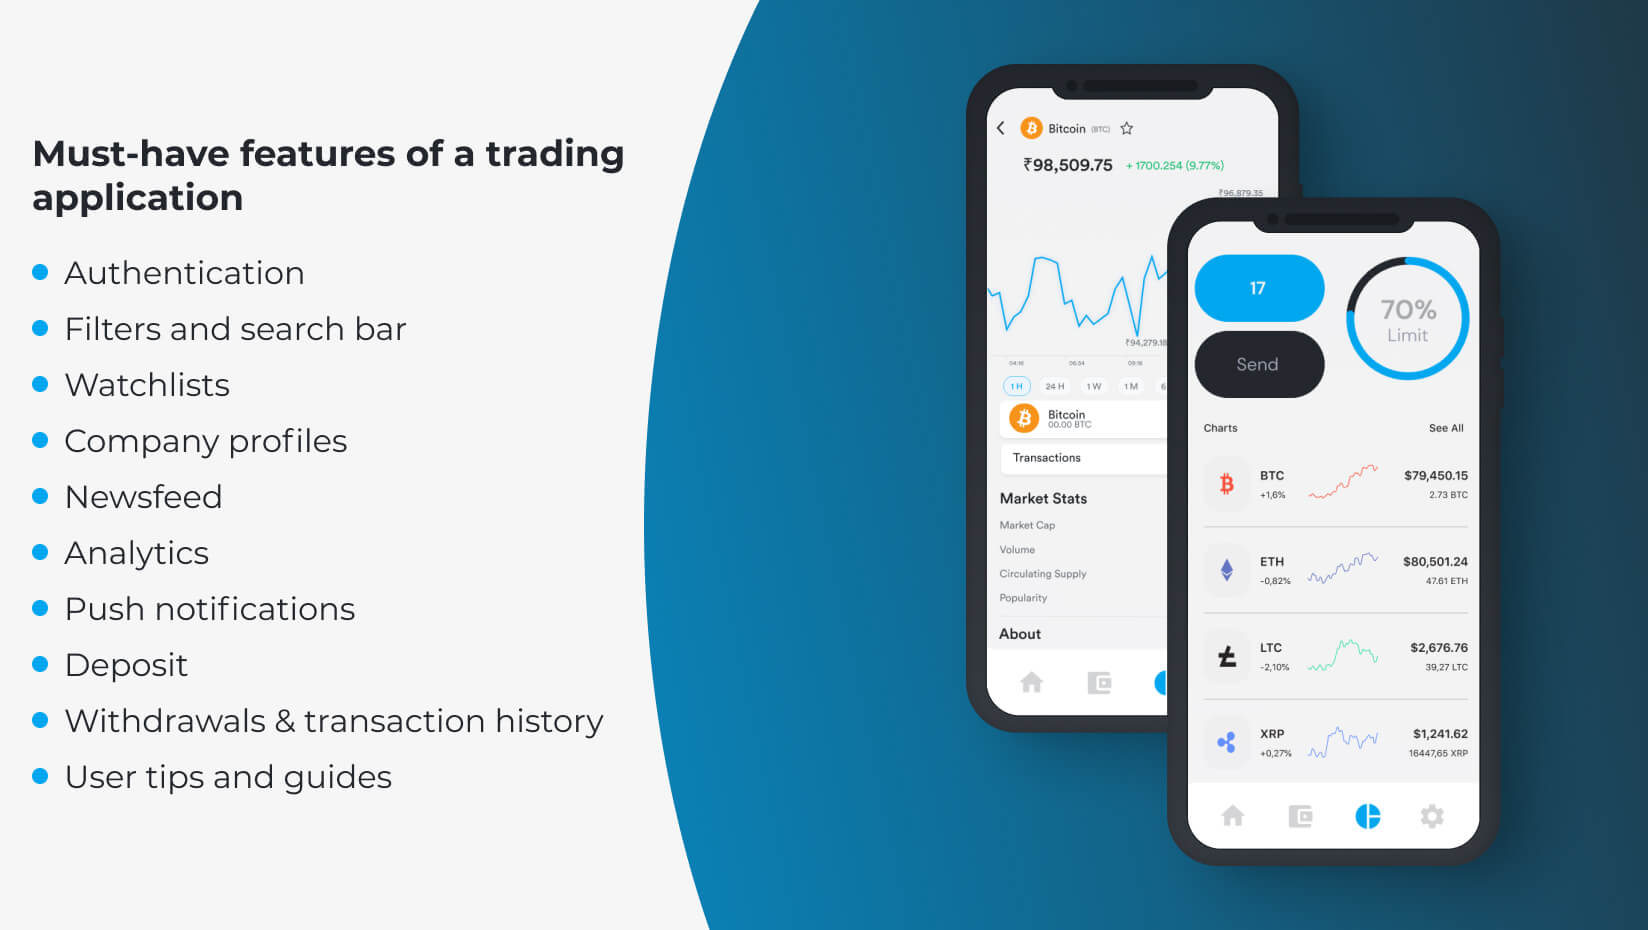 Must-have features of a trading application